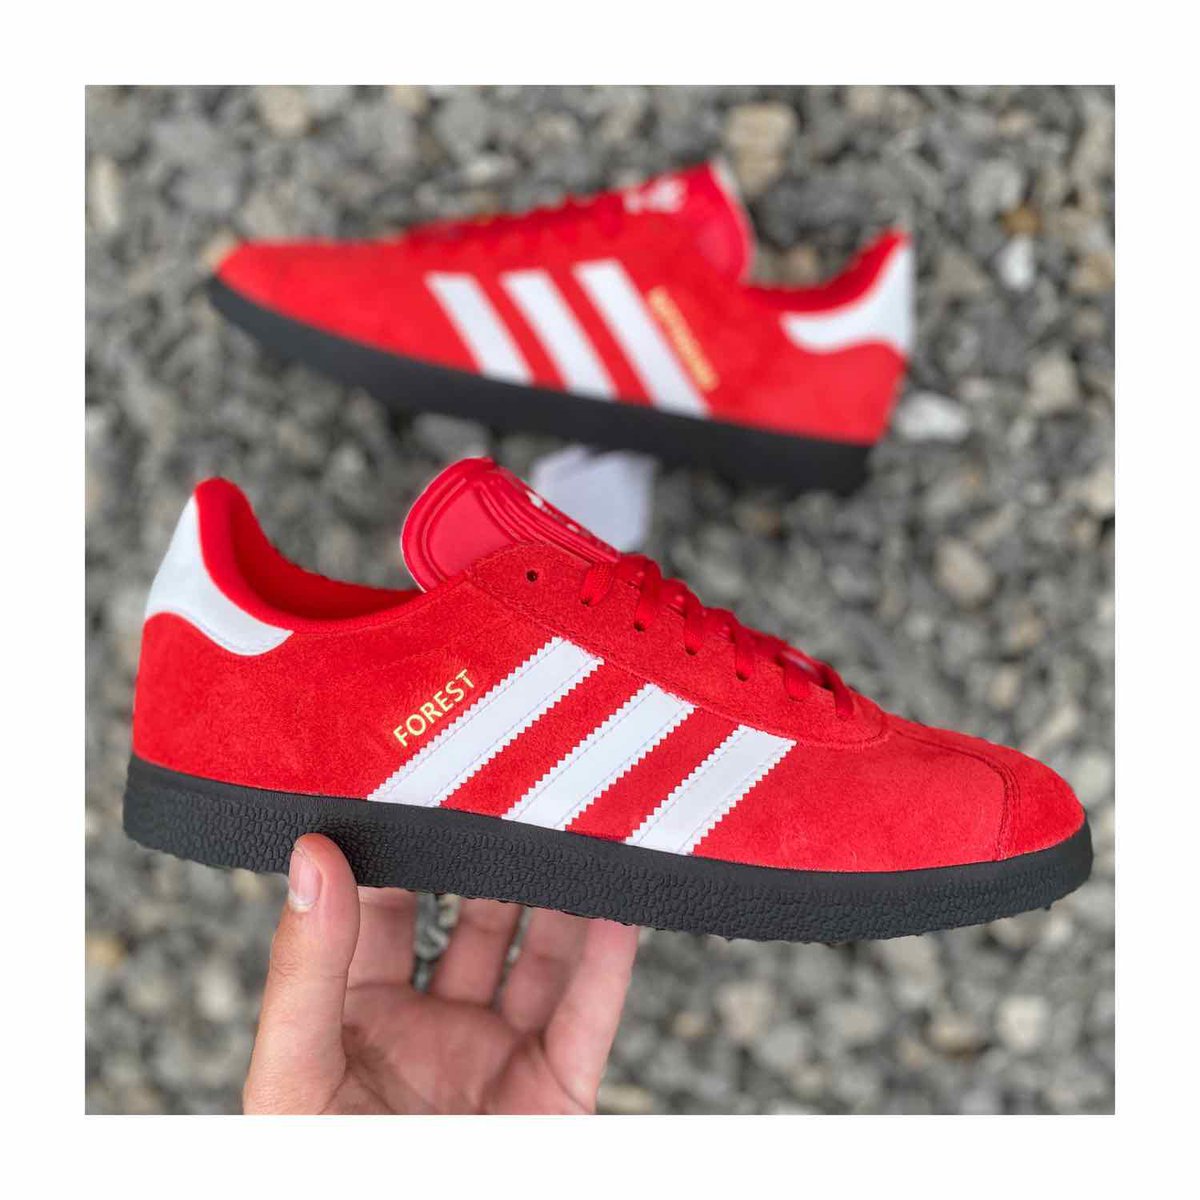 cursief Tijdig complexiteit Adidas Restorations on Twitter: "𝐀𝐝𝐢𝐝𝐚𝐬 𝐍𝐨𝐭𝐭𝐢𝐧𝐠𝐡𝐚𝐦  𝐅𝐨𝐫𝐞𝐬𝐭 ⚽️ Limited Pairs Available (𝟐𝟎) These are now available to  Purchase! #𝙉𝙤𝙩𝙩𝙞𝙣𝙜𝙝𝙖𝙢 #𝙁𝙤𝙧𝙚𝙨𝙩 #𝙇𝙞𝙢𝙞𝙩𝙚𝙙 @StuartBroad8  @mattforde https://t.co ...